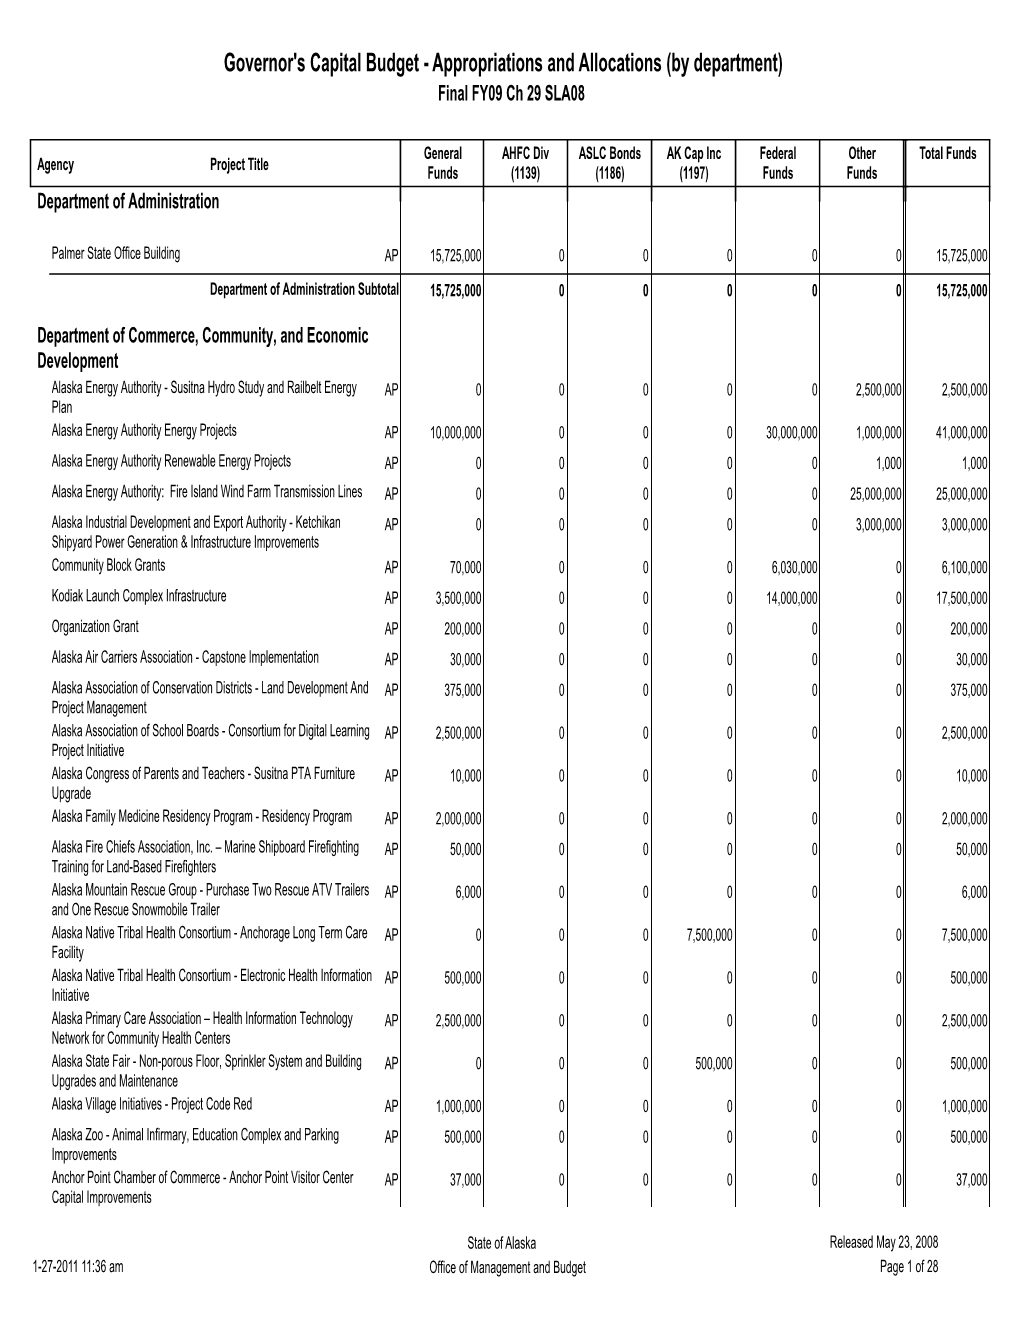 Governor's Capital Budget - Appropriations and Allocations (By Department) Final FY09 Ch 29 SLA08